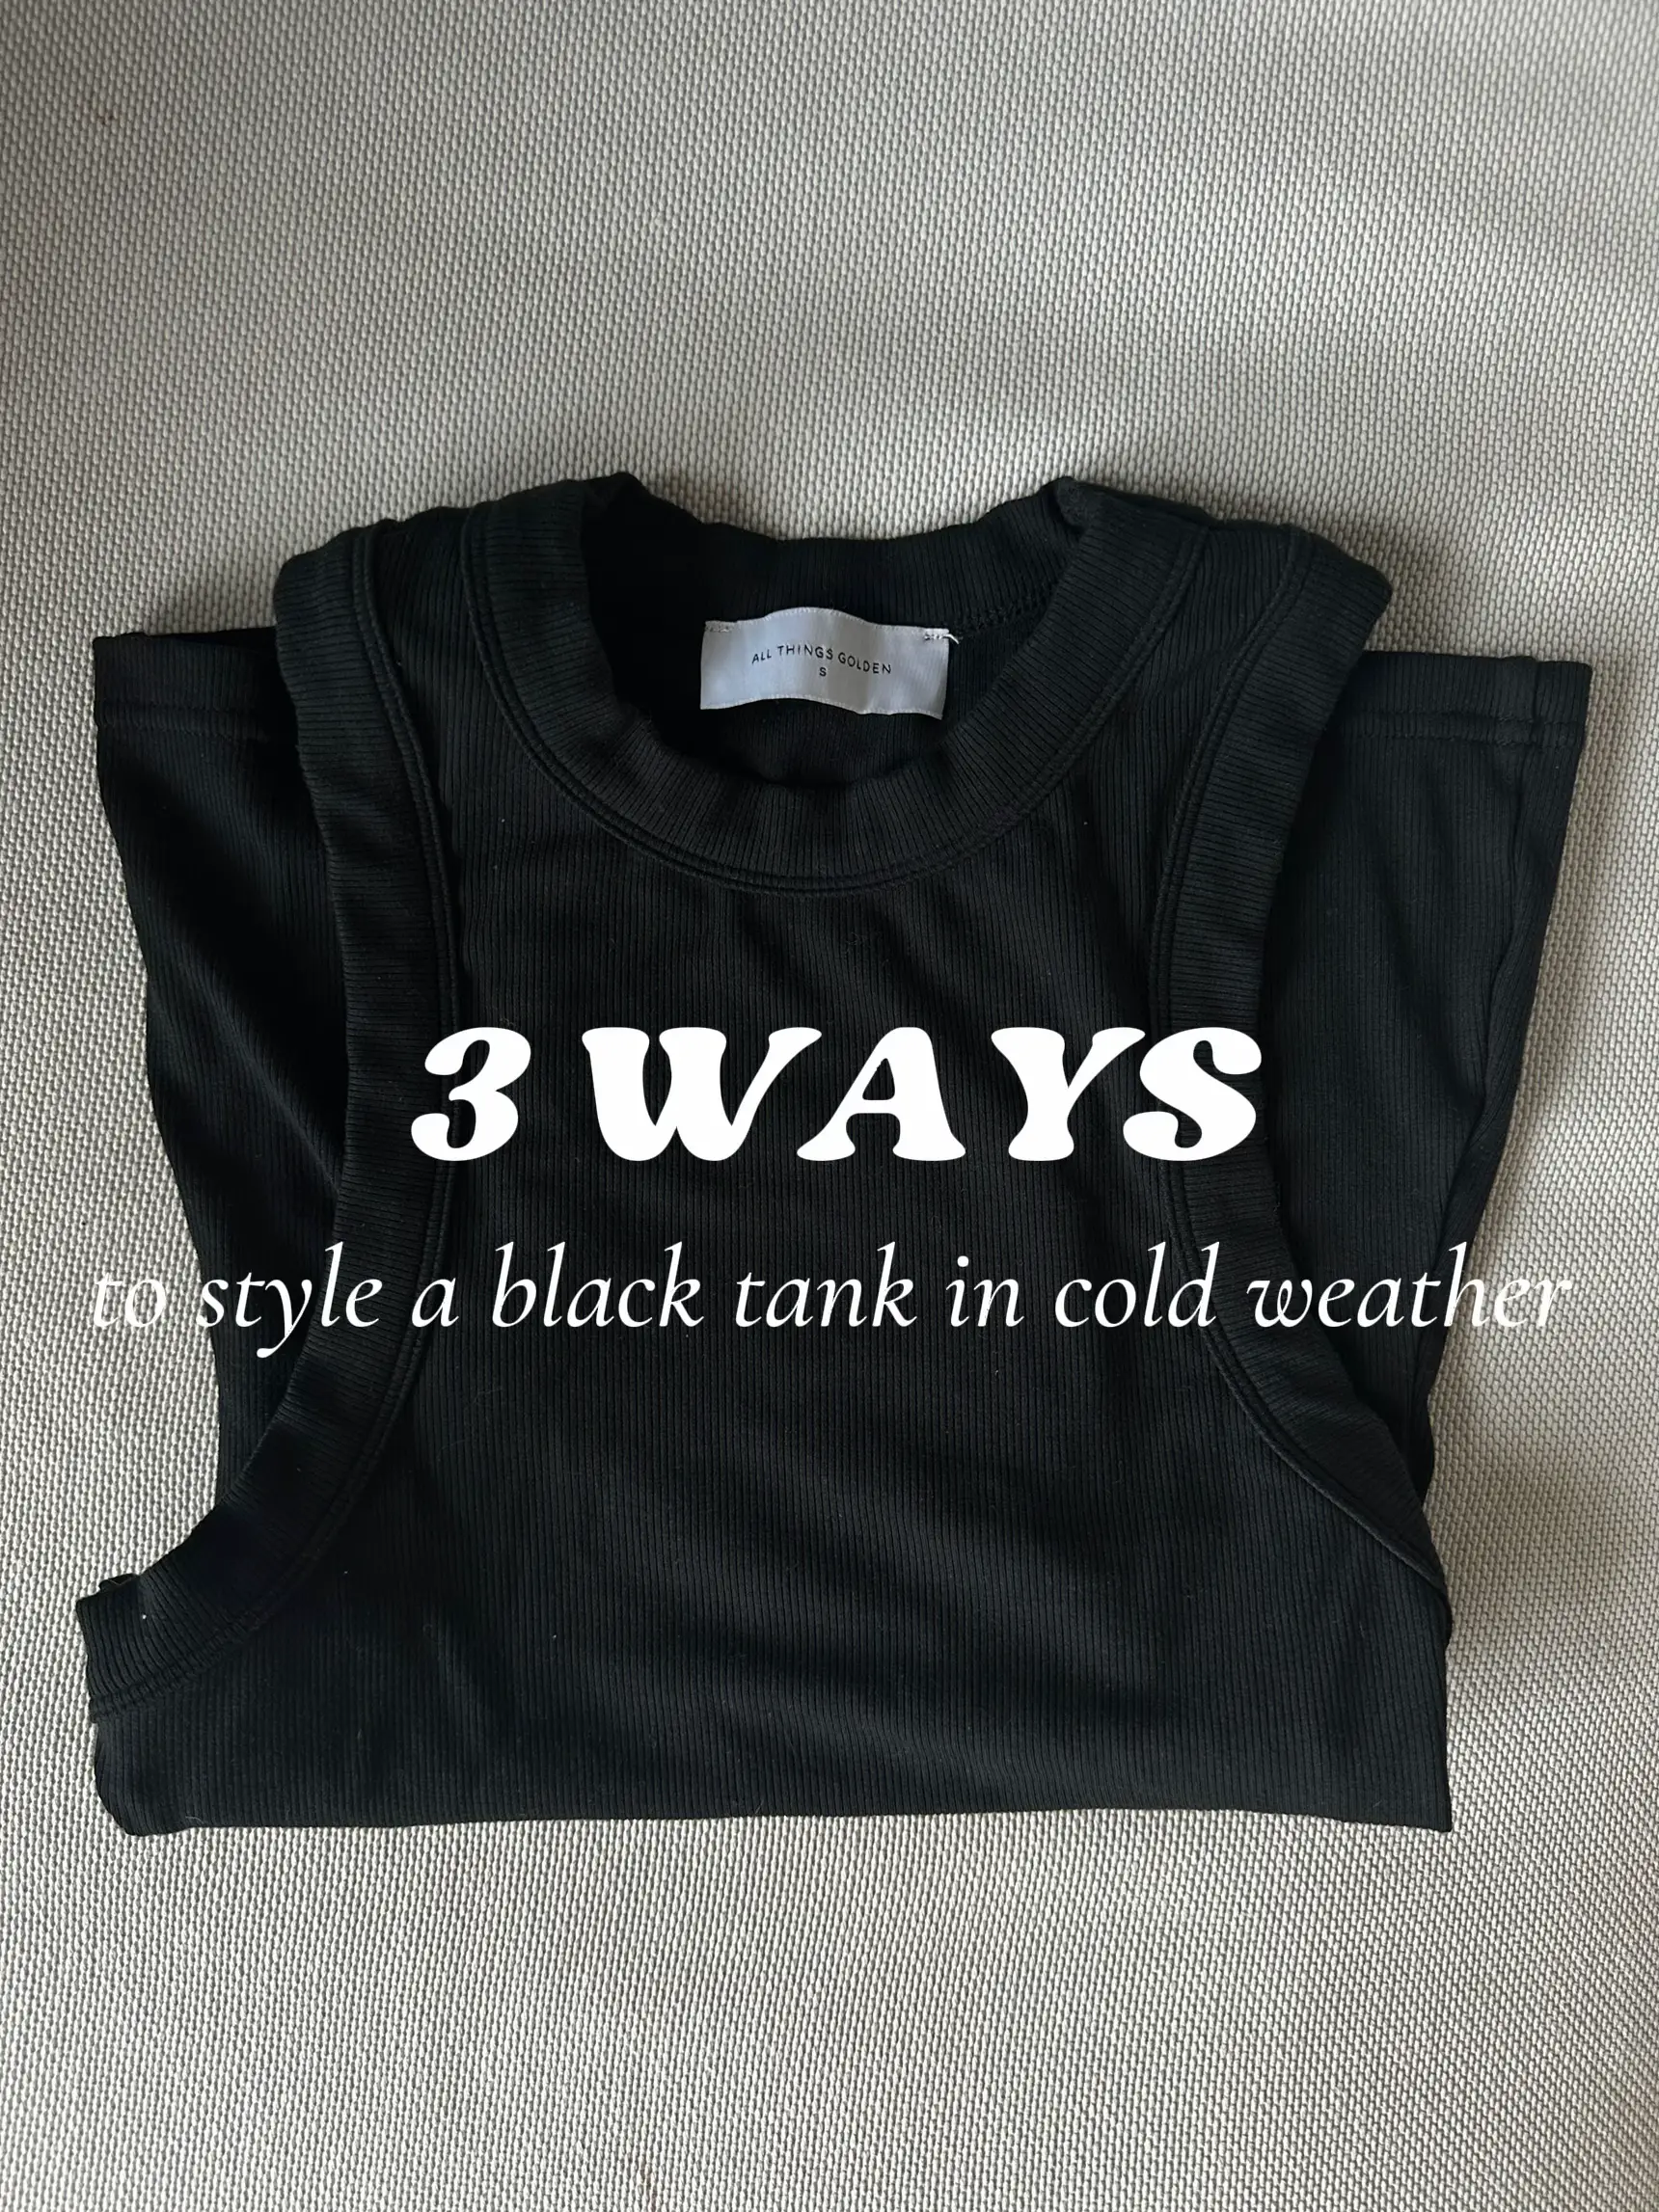 how to style a black tank top - Lemon8 Search